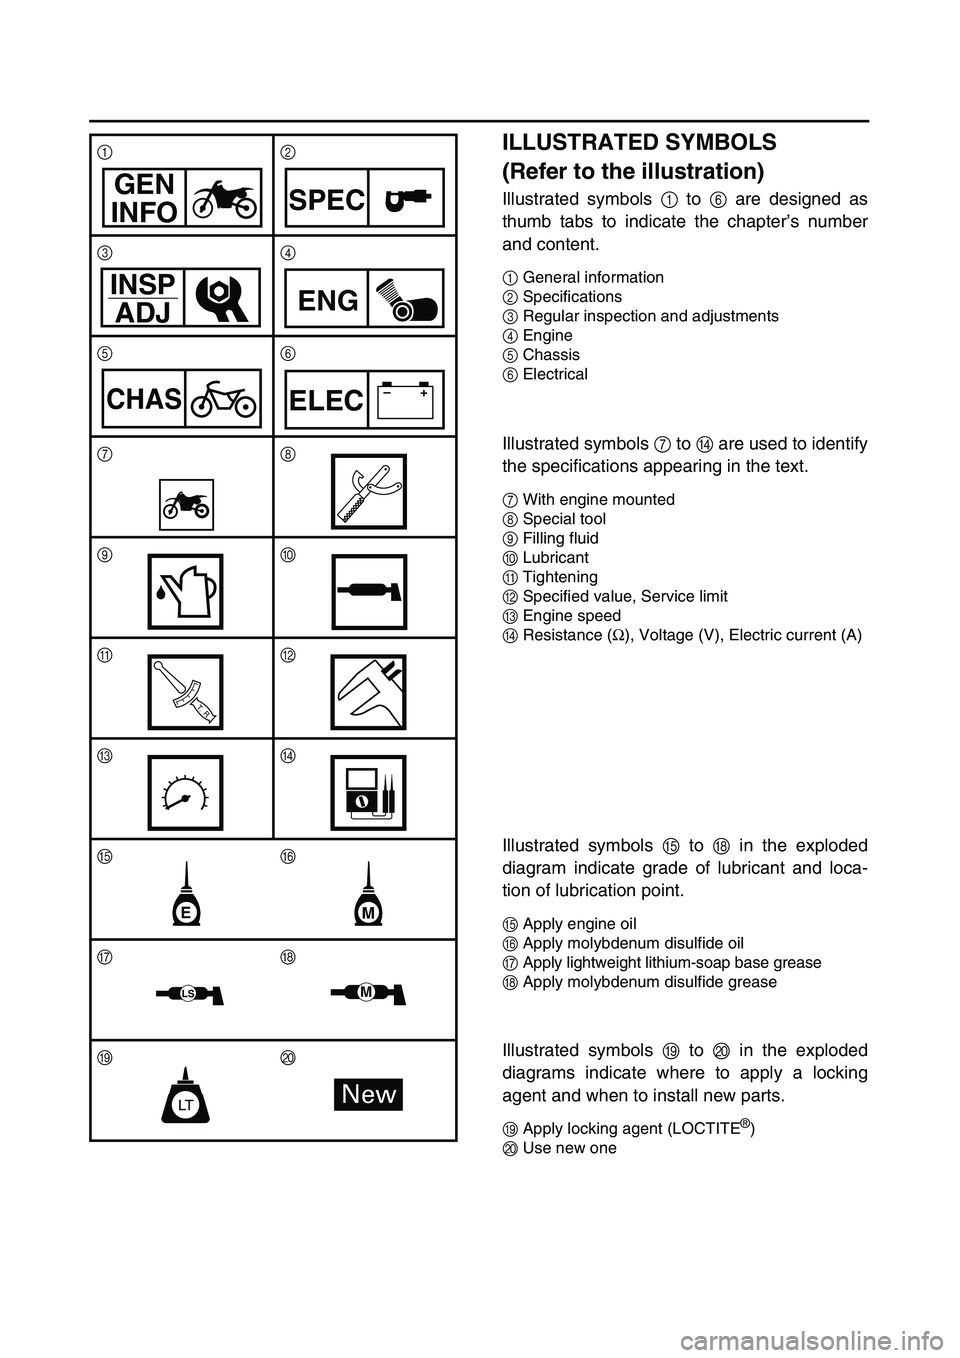 YAMAHA TTR90 2003  Owners Manual  
ILLUSTRATED SYMBOLS 
(Refer to the illustration) 
Illustrated symbols  
1  
 to   
6  
 are designed as
thumb tabs to indicate the chapter’s number
and content. 
1 
General information 
2 
Specifi